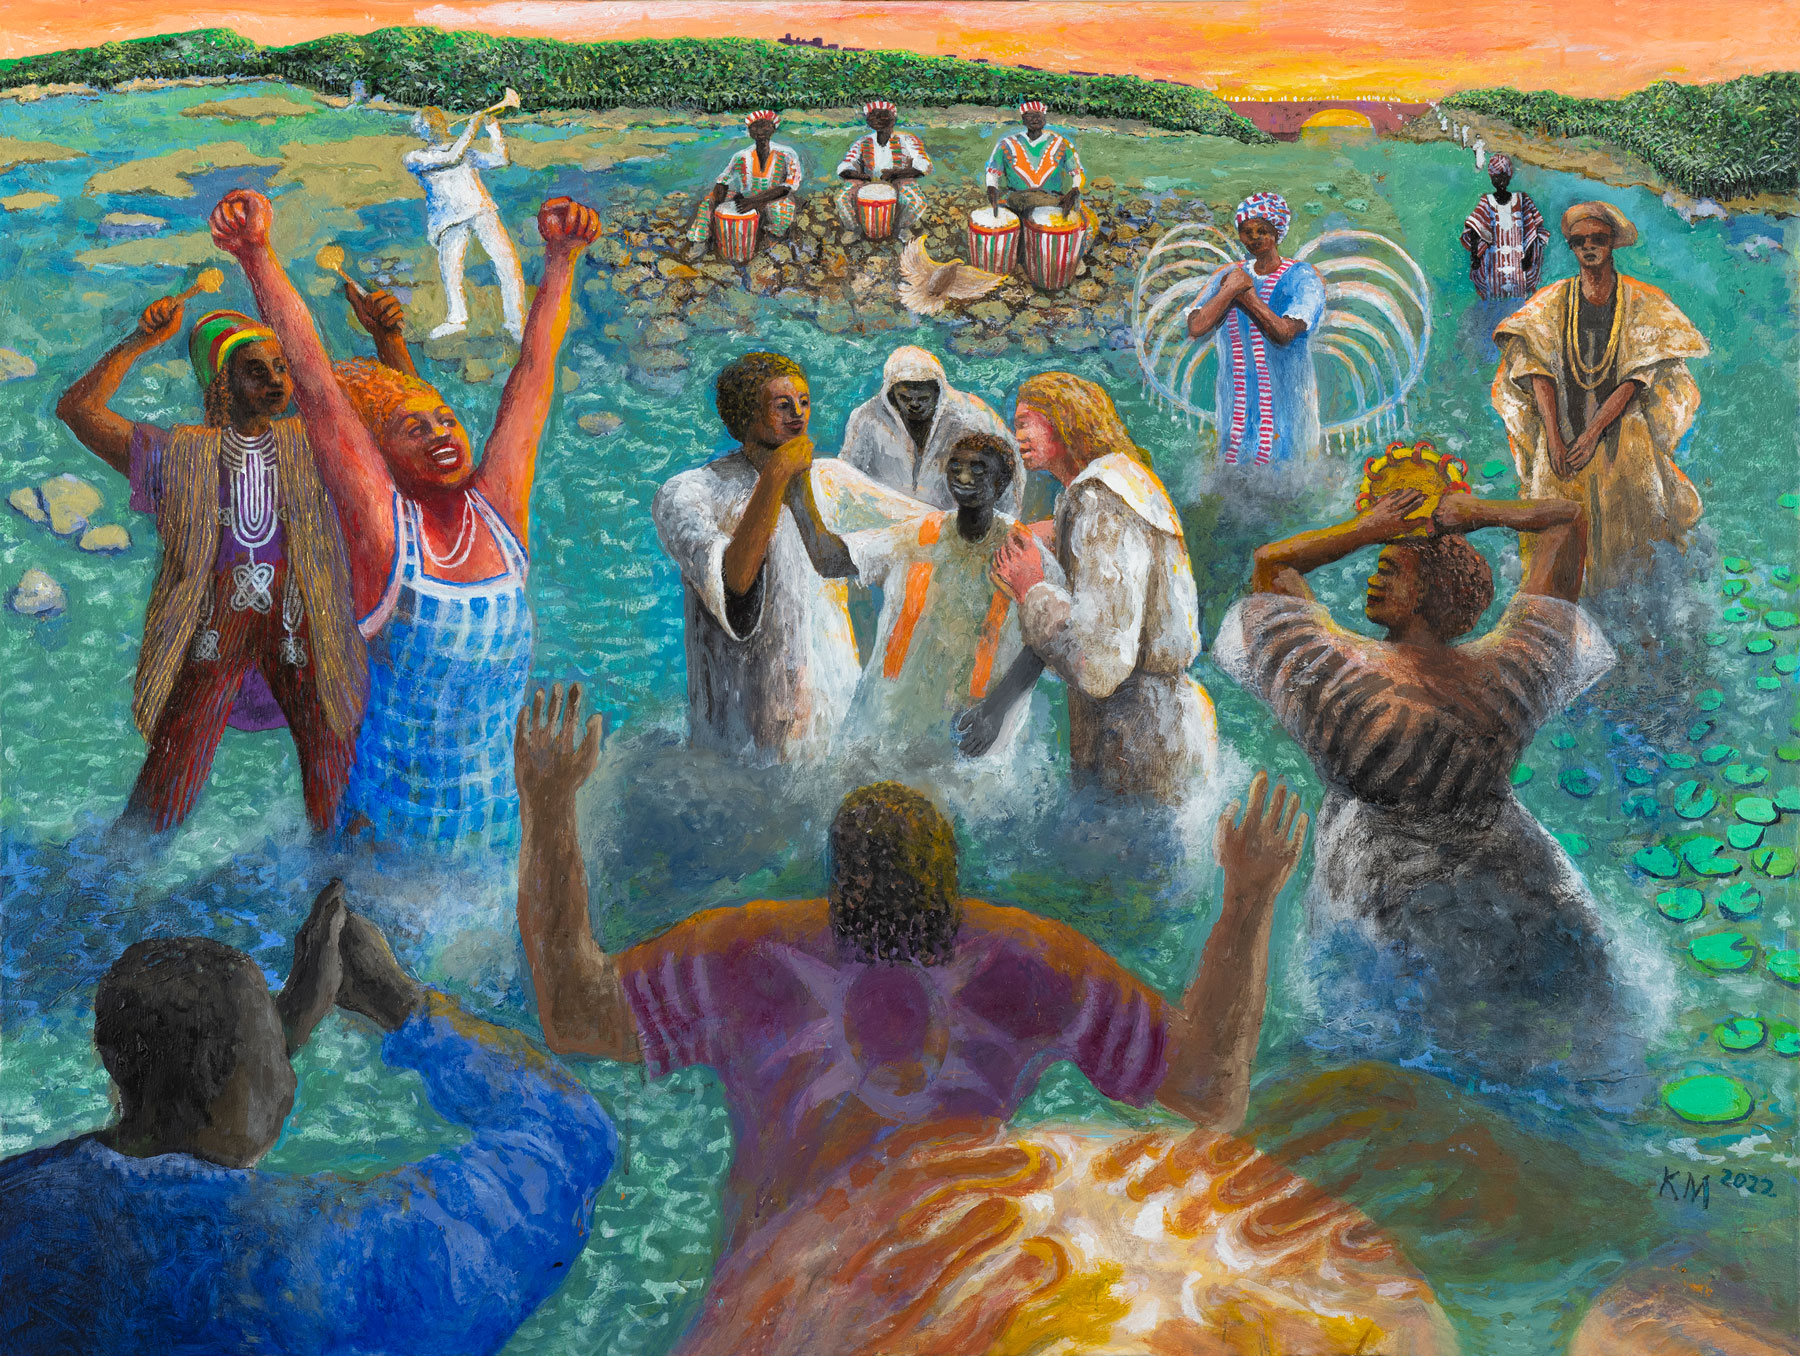 Painting of people dancing with arms raised in water